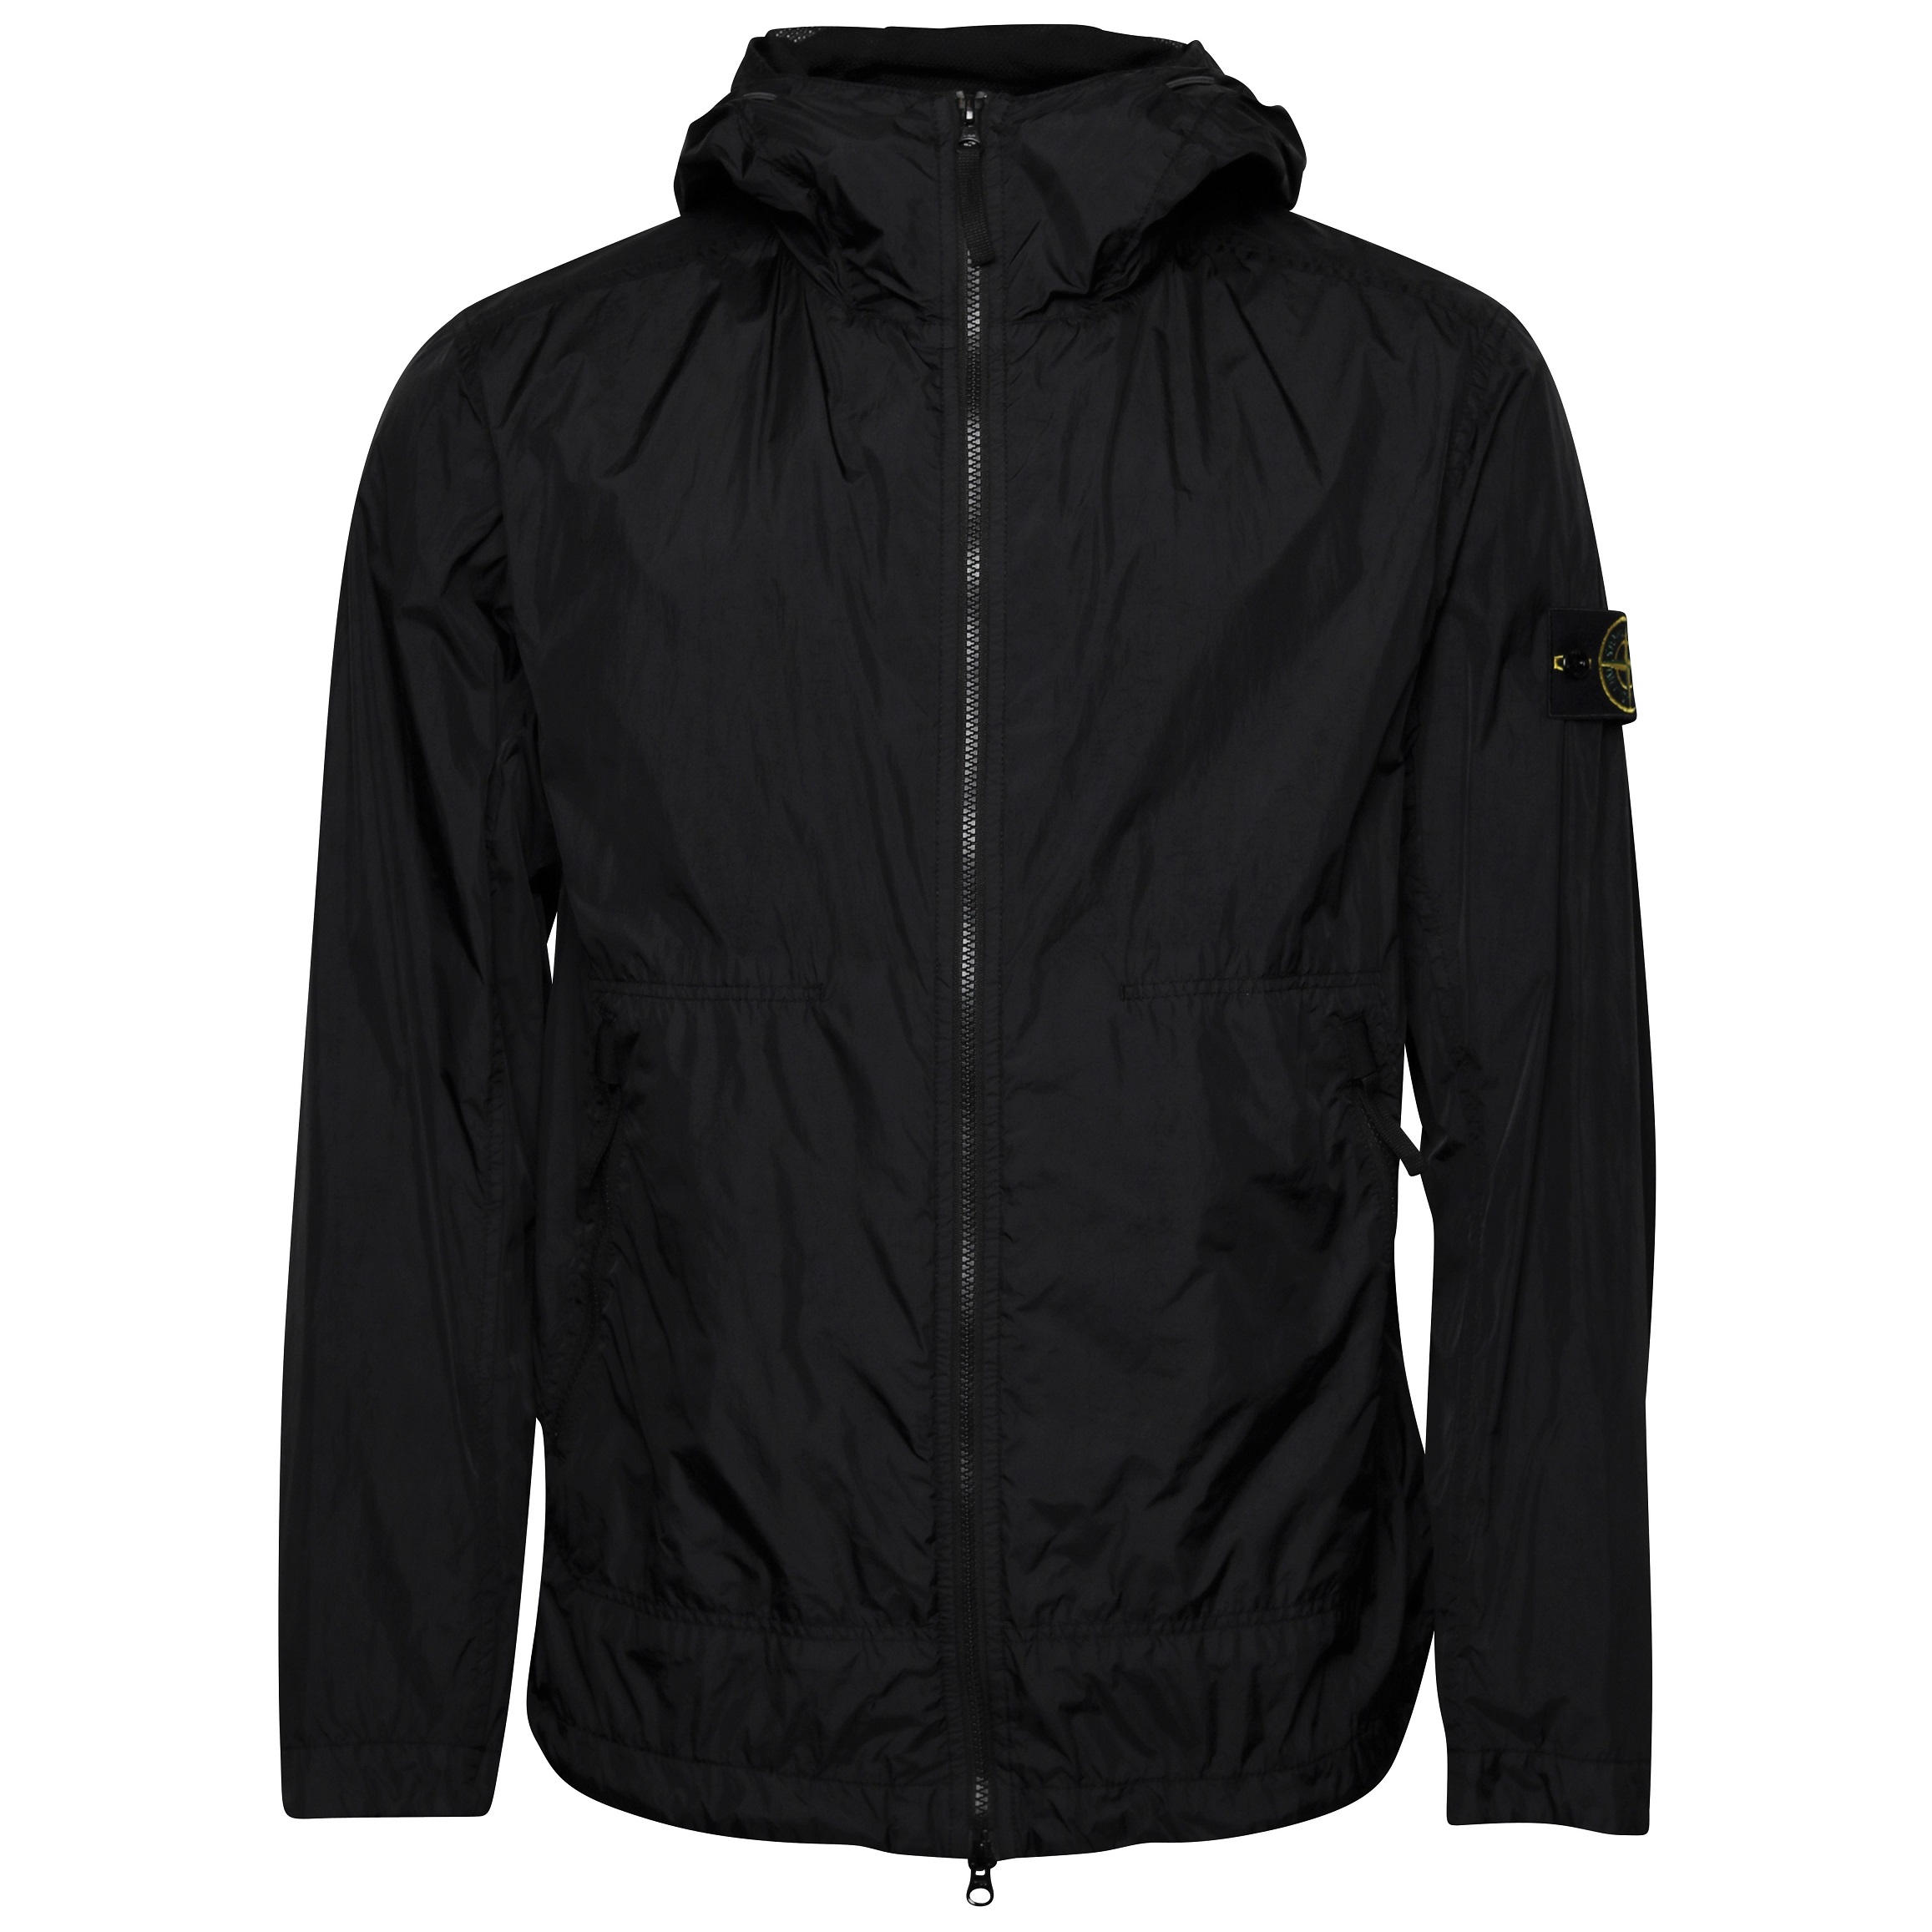 Stone Island Garment Dyed Crinkle Reps Hooded Light Jacket in Black 2XL